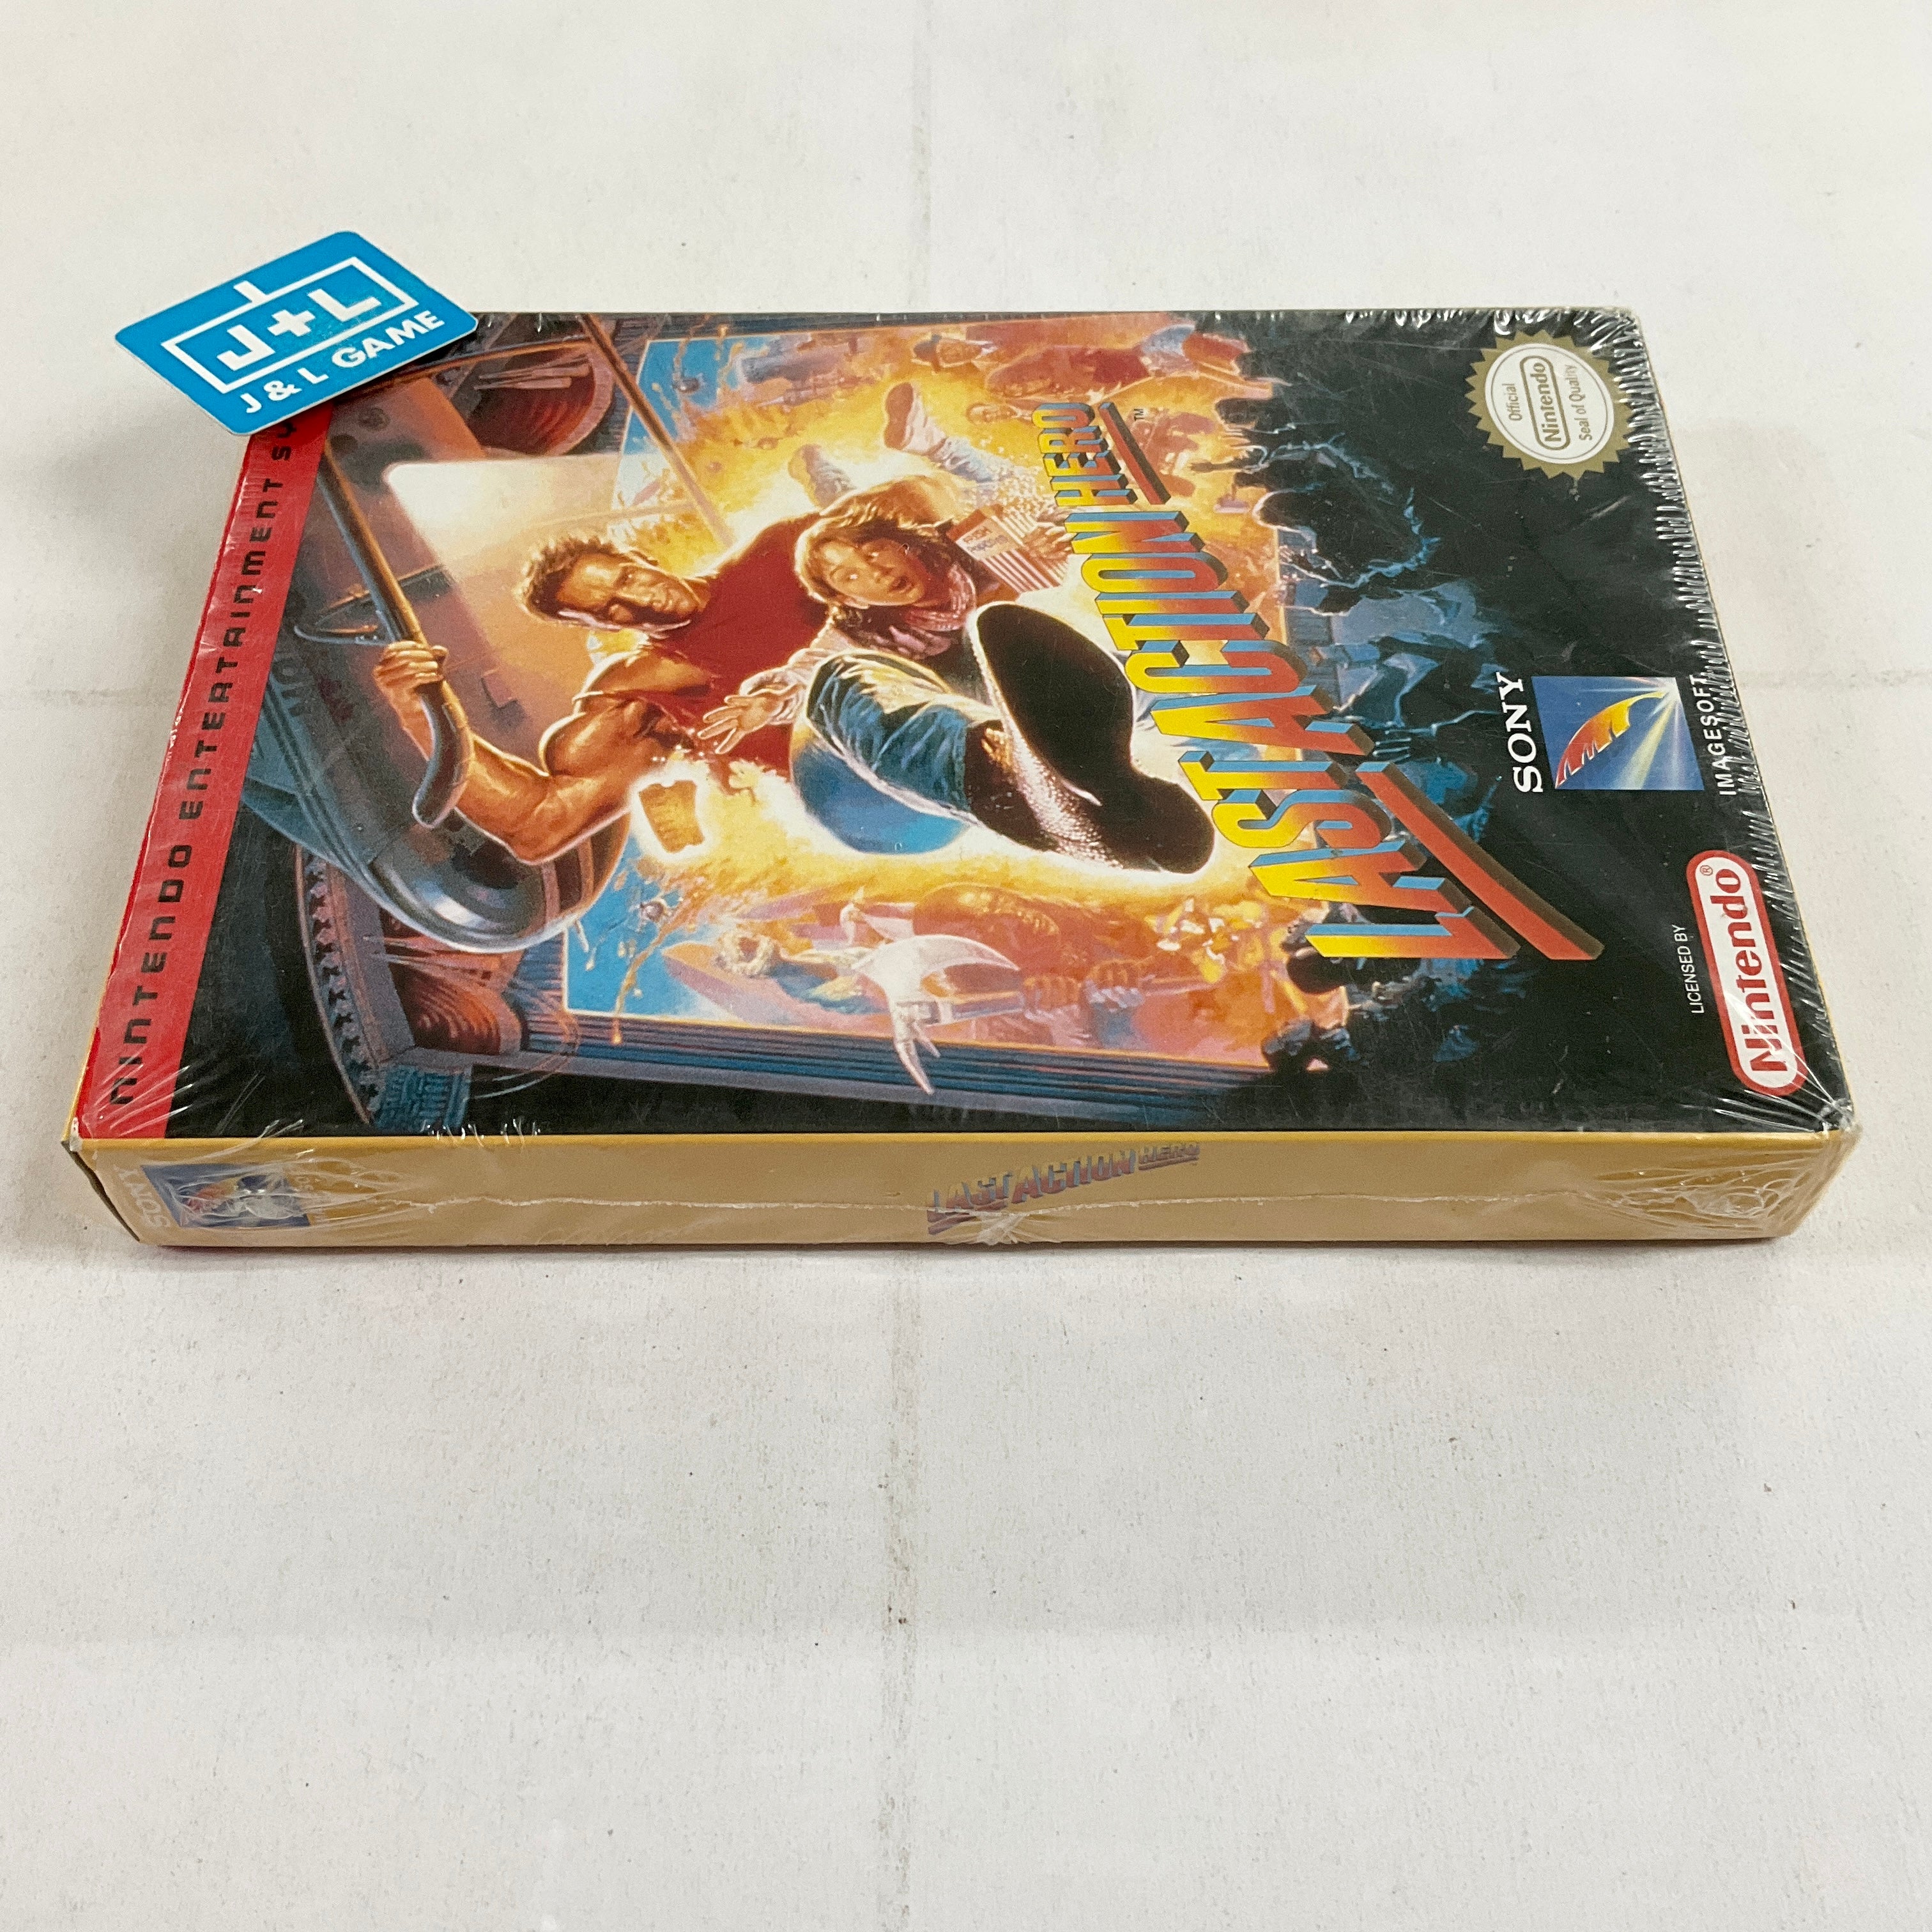 Last Action Hero - (NES) Nintendo Entertainment System [Pre-Owned] Video Games Sony Imagesoft   